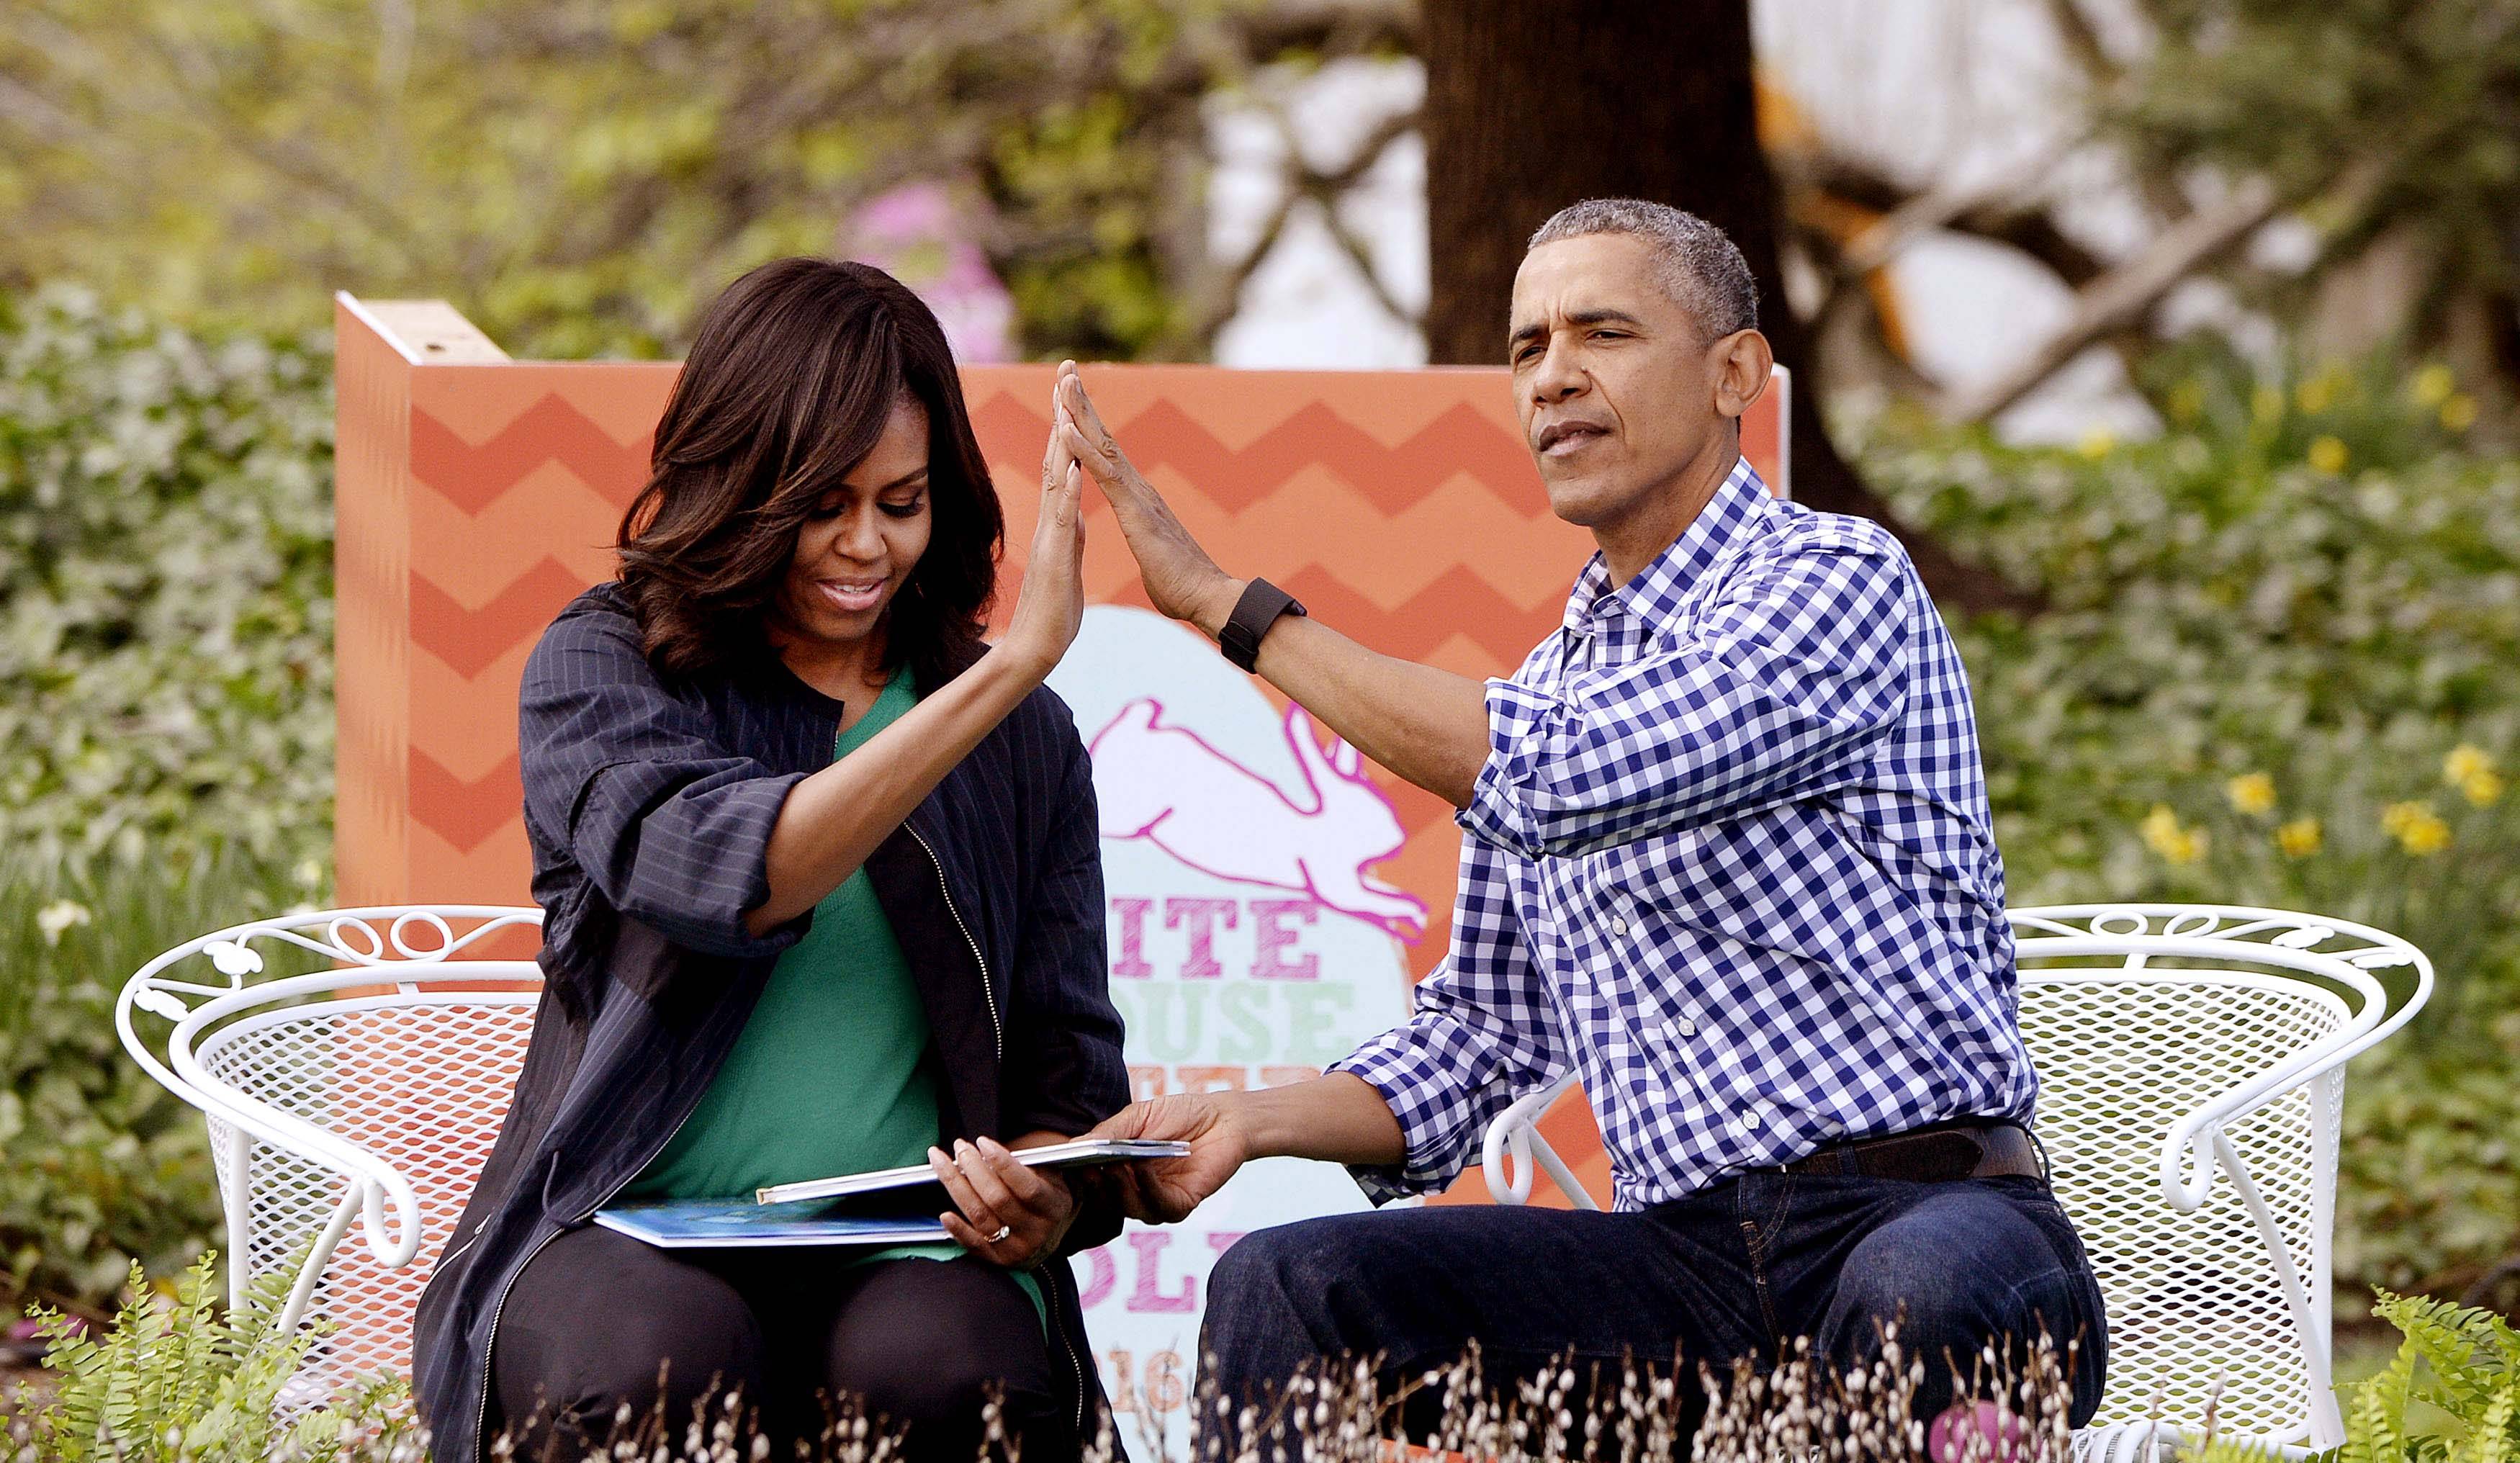 News: The Obamas Sign Record-Breaking Book Deal Worth $60 Million